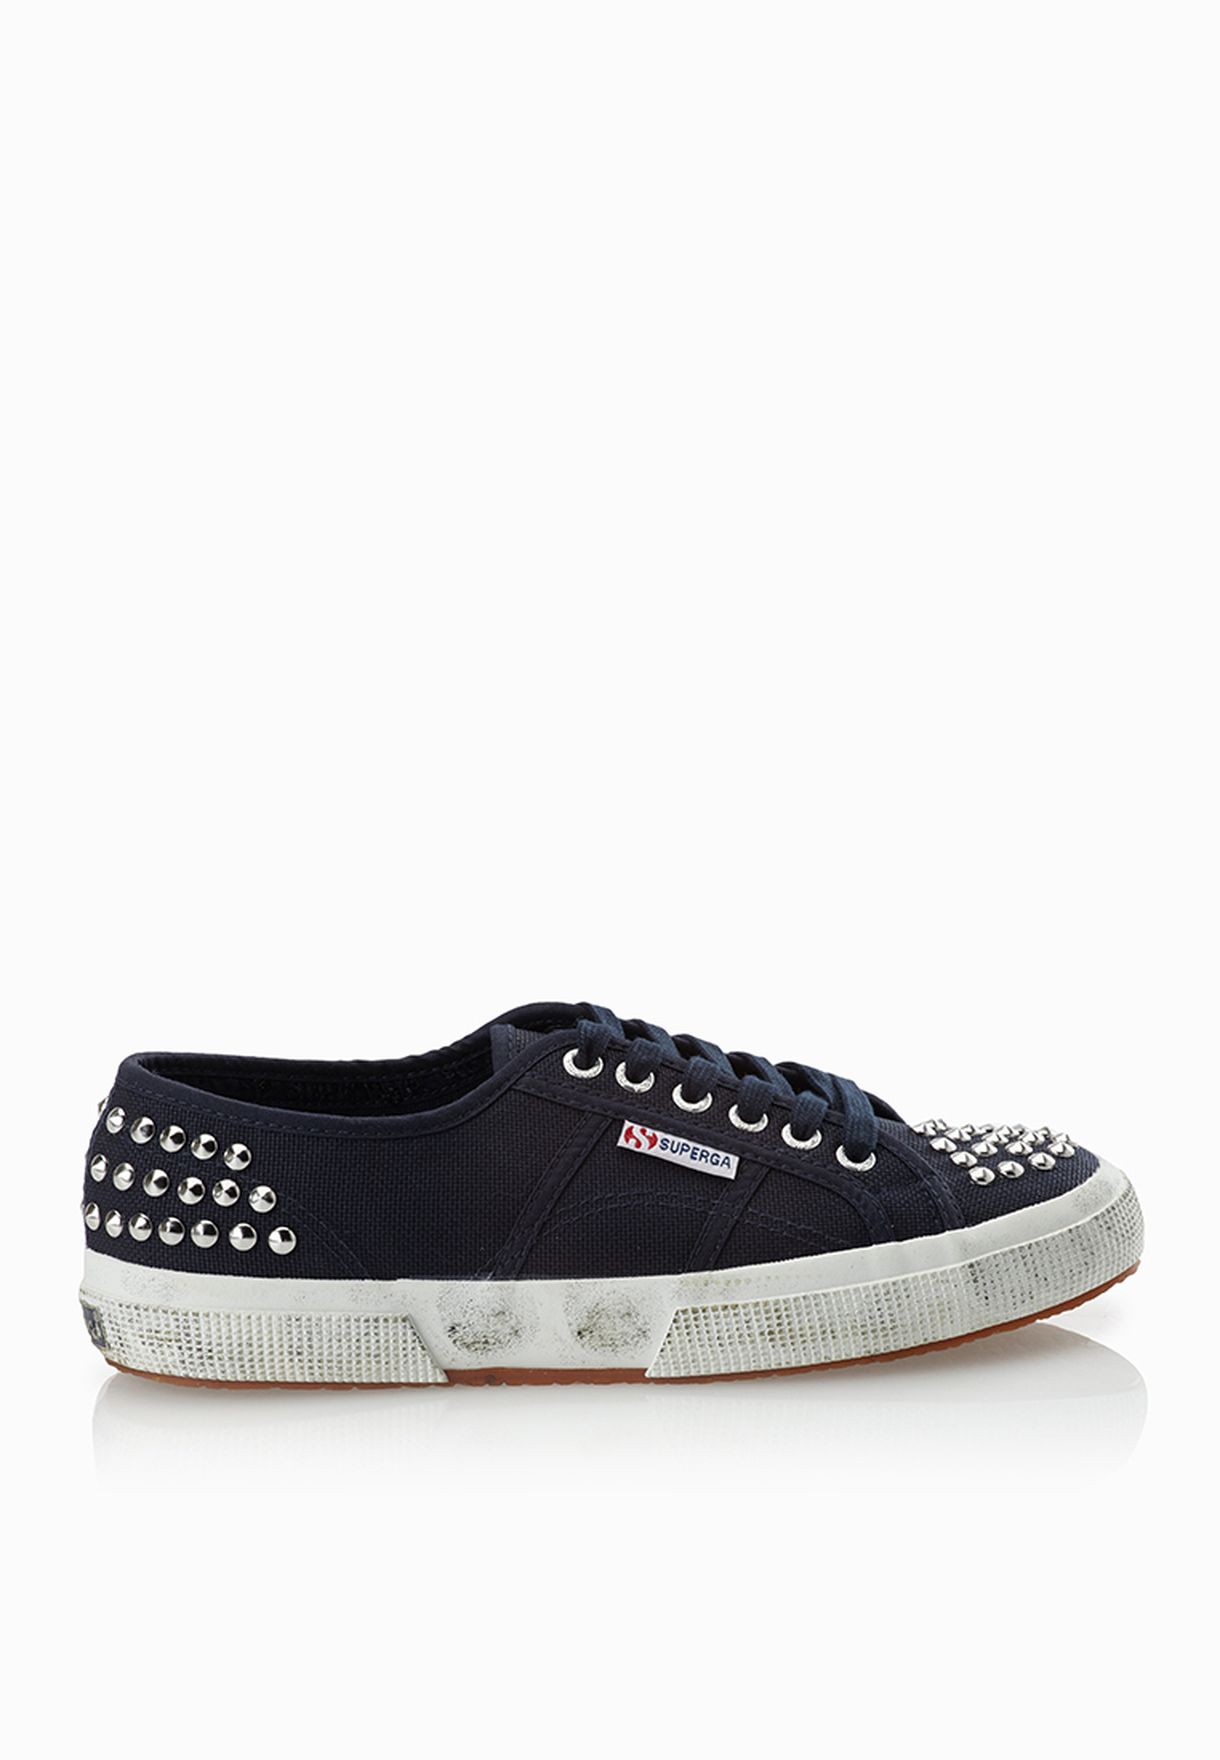 superga studded sneakers